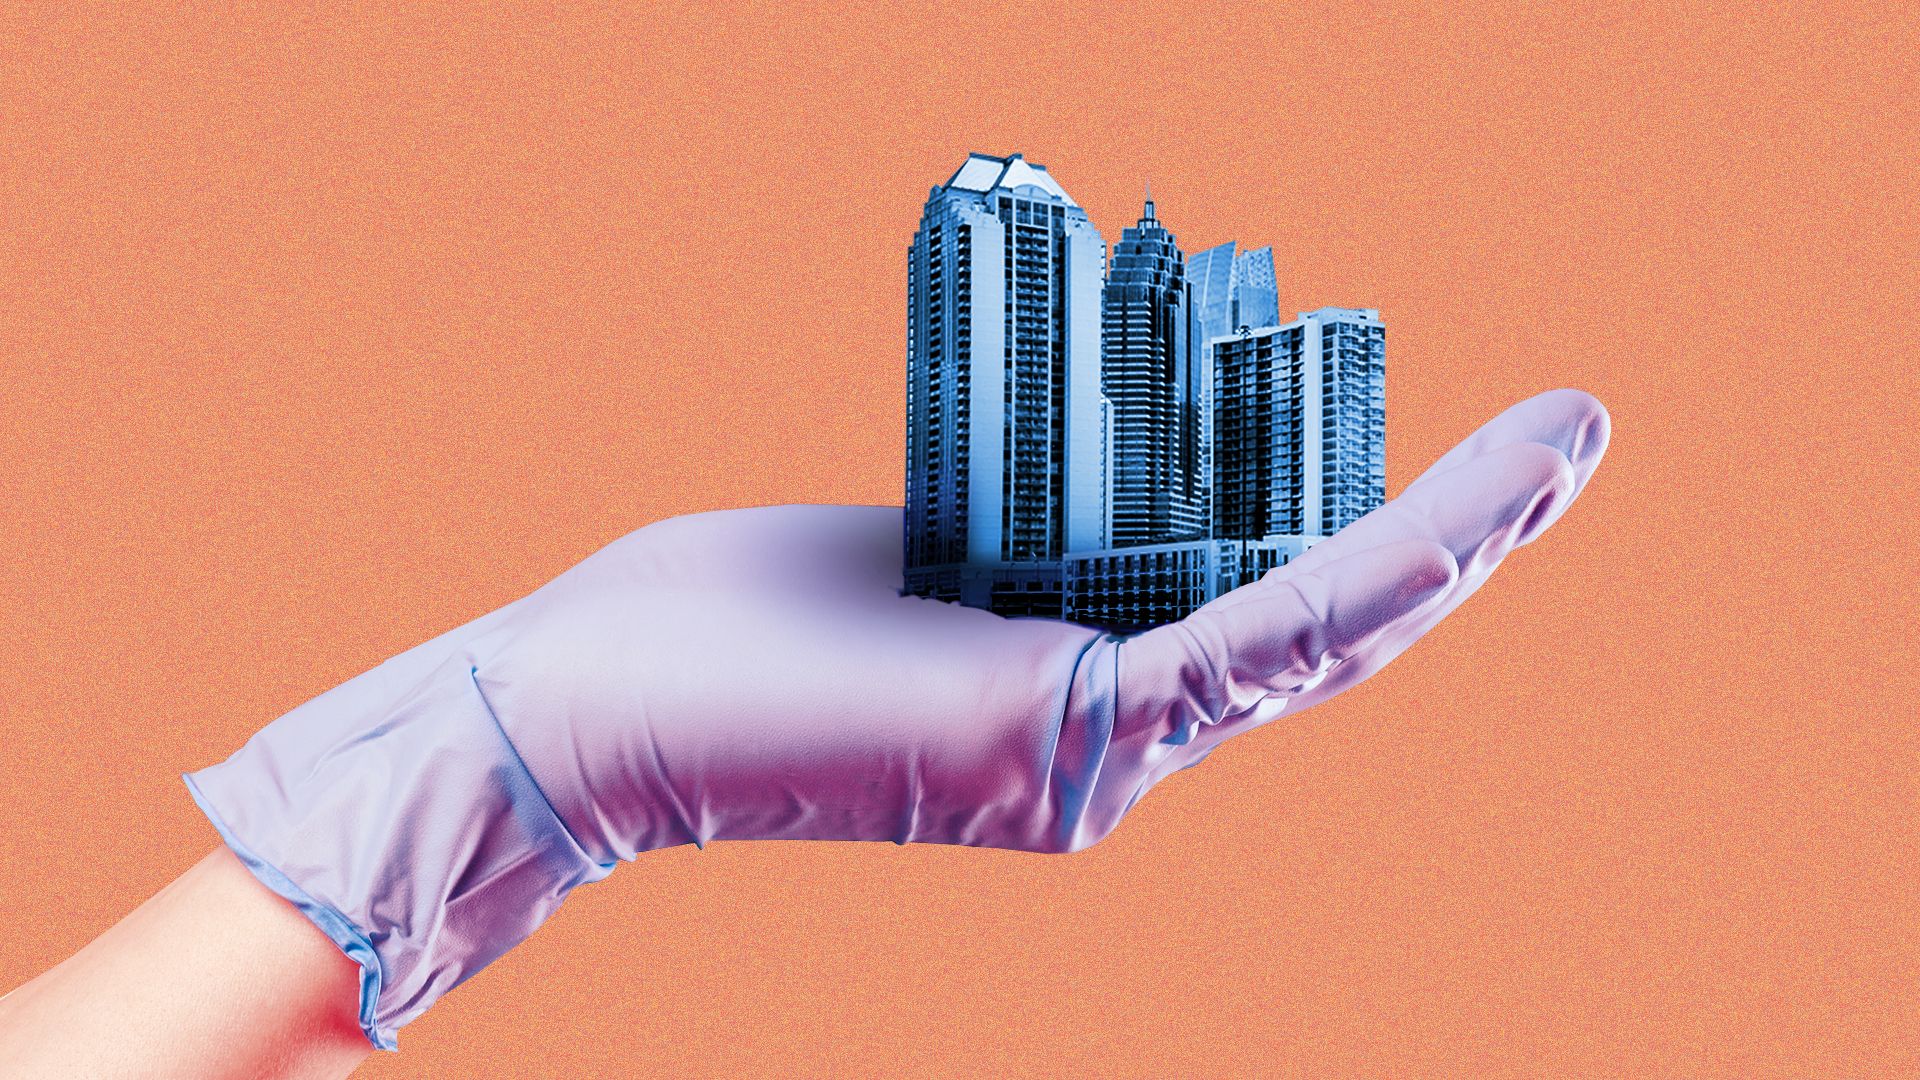 Illustration of a small cityscape sitting in the palm of a hand in a medical glove